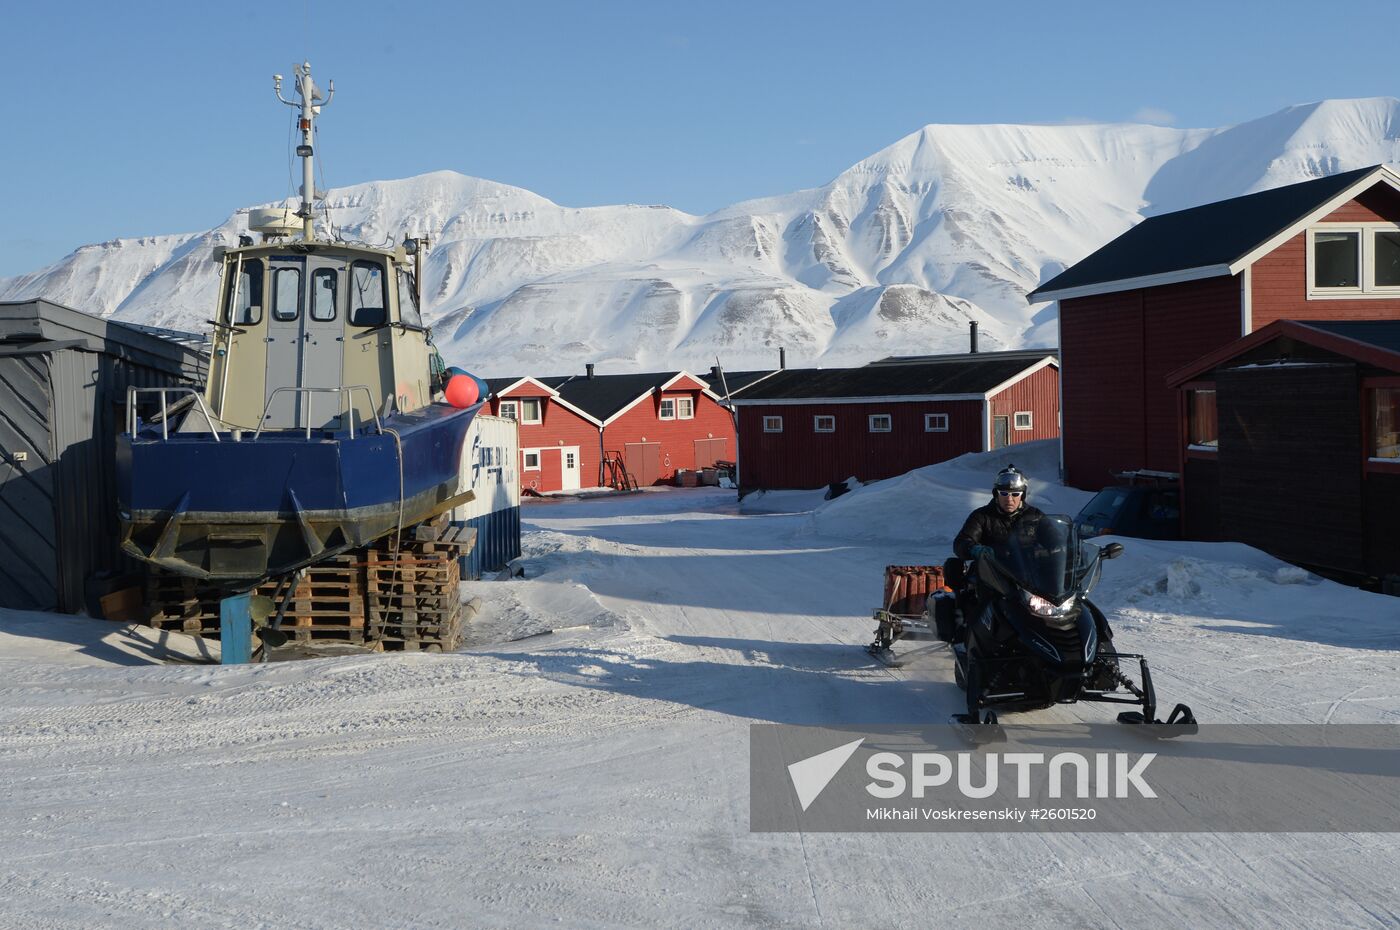 High-latitude Arctic expedition to Spitsbegen as part of Arctic-2015 project